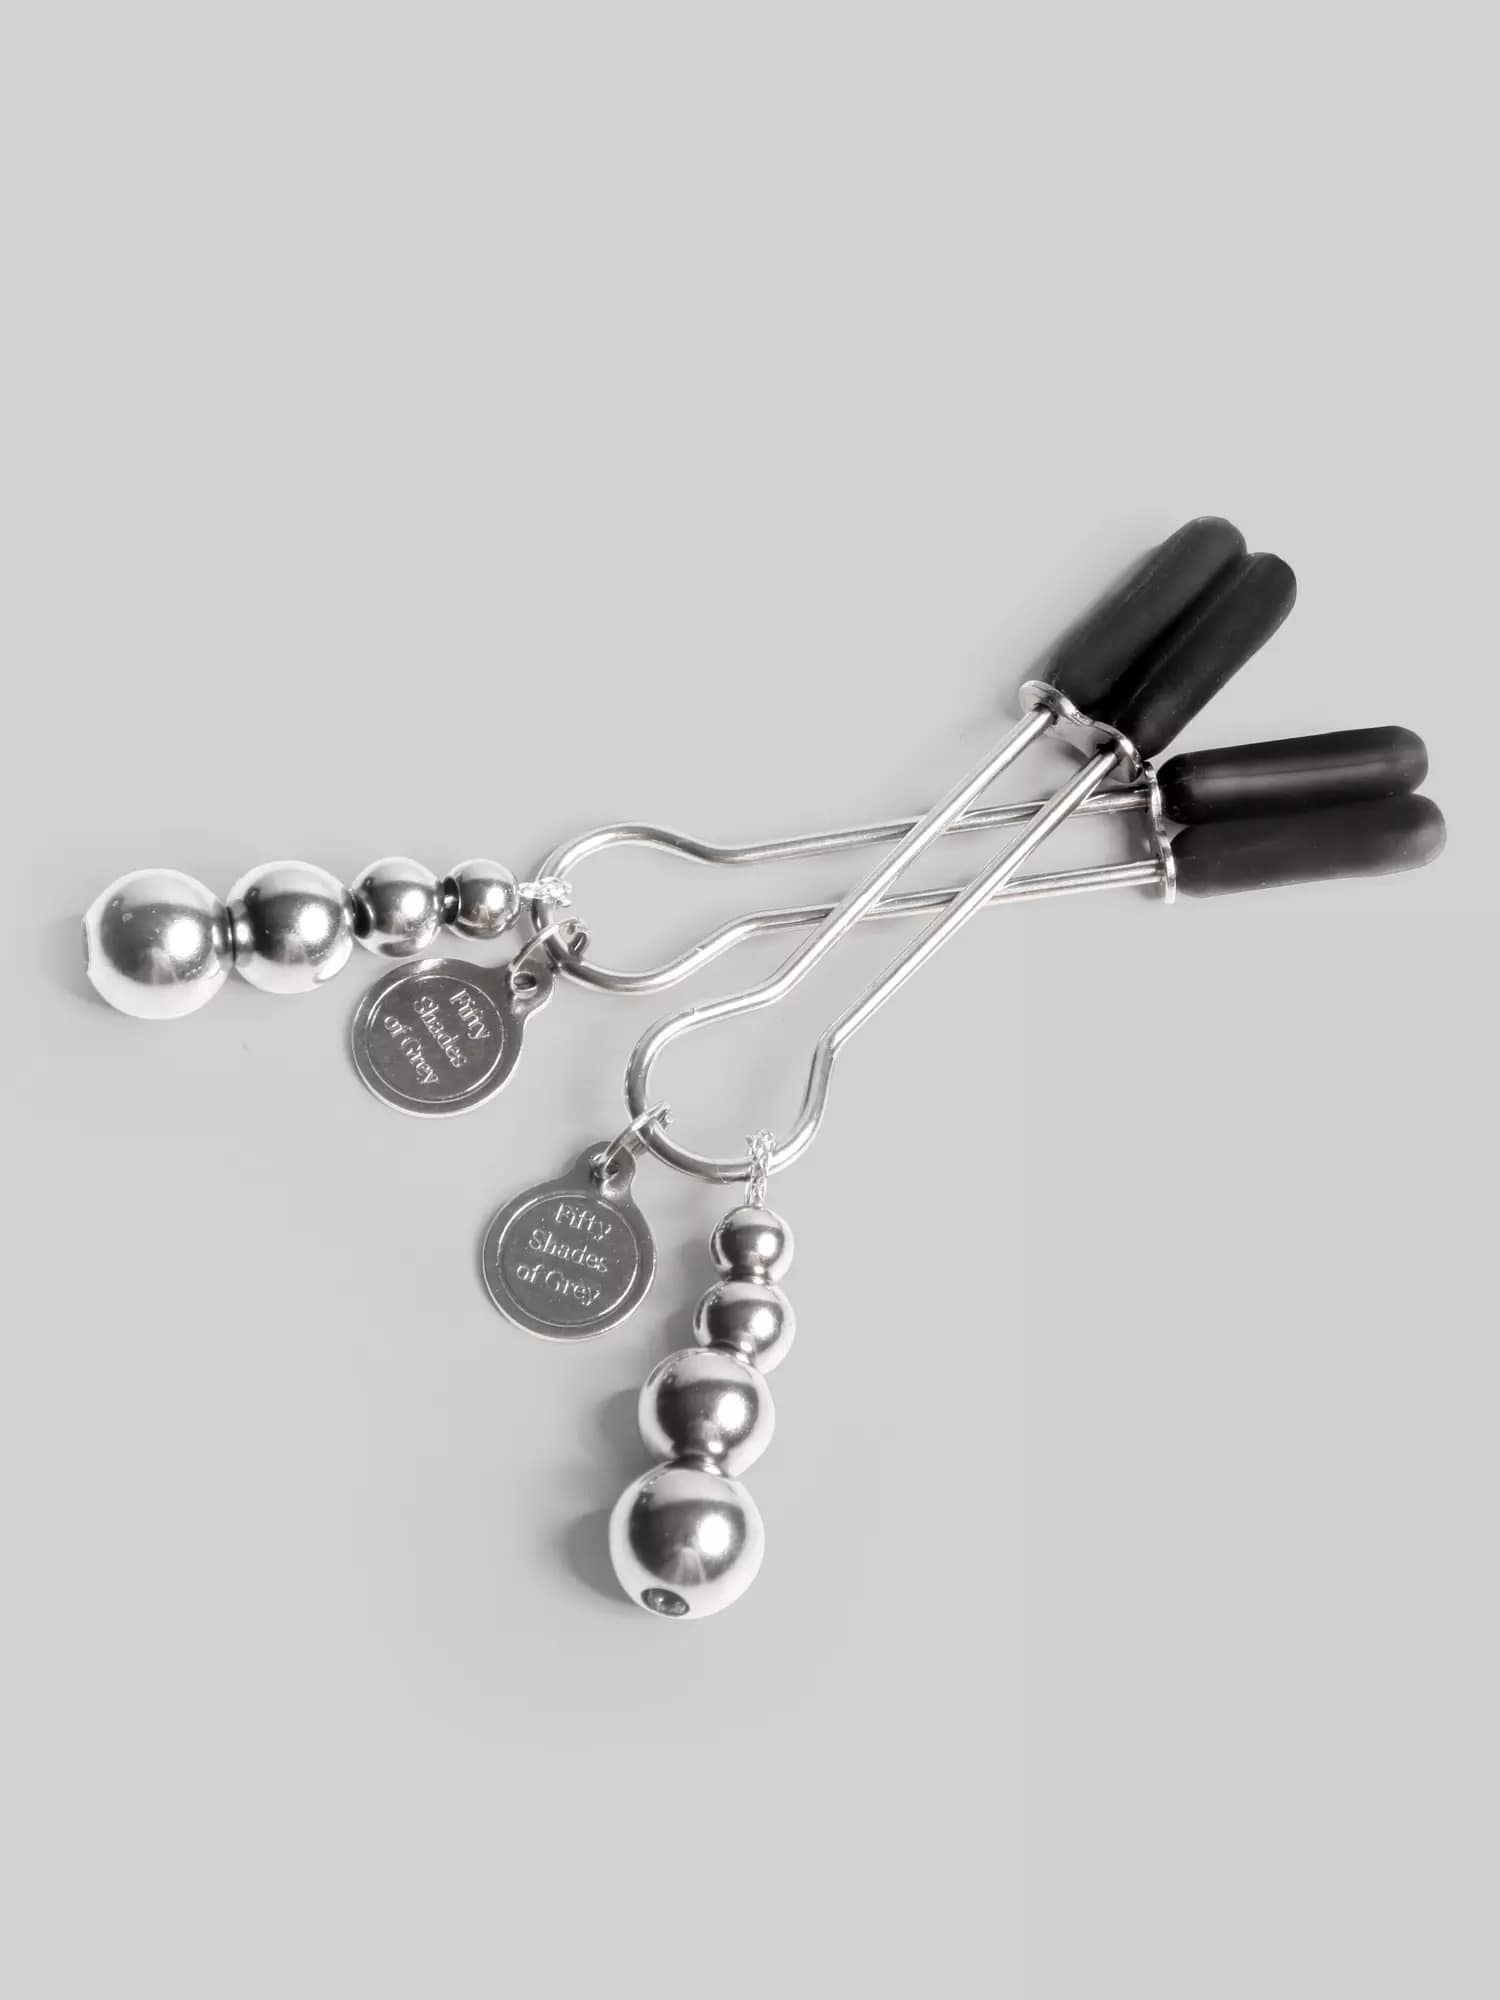 Fifty Shades of Grey The Pinch Adjustable Nipple Clamps. Slide 12